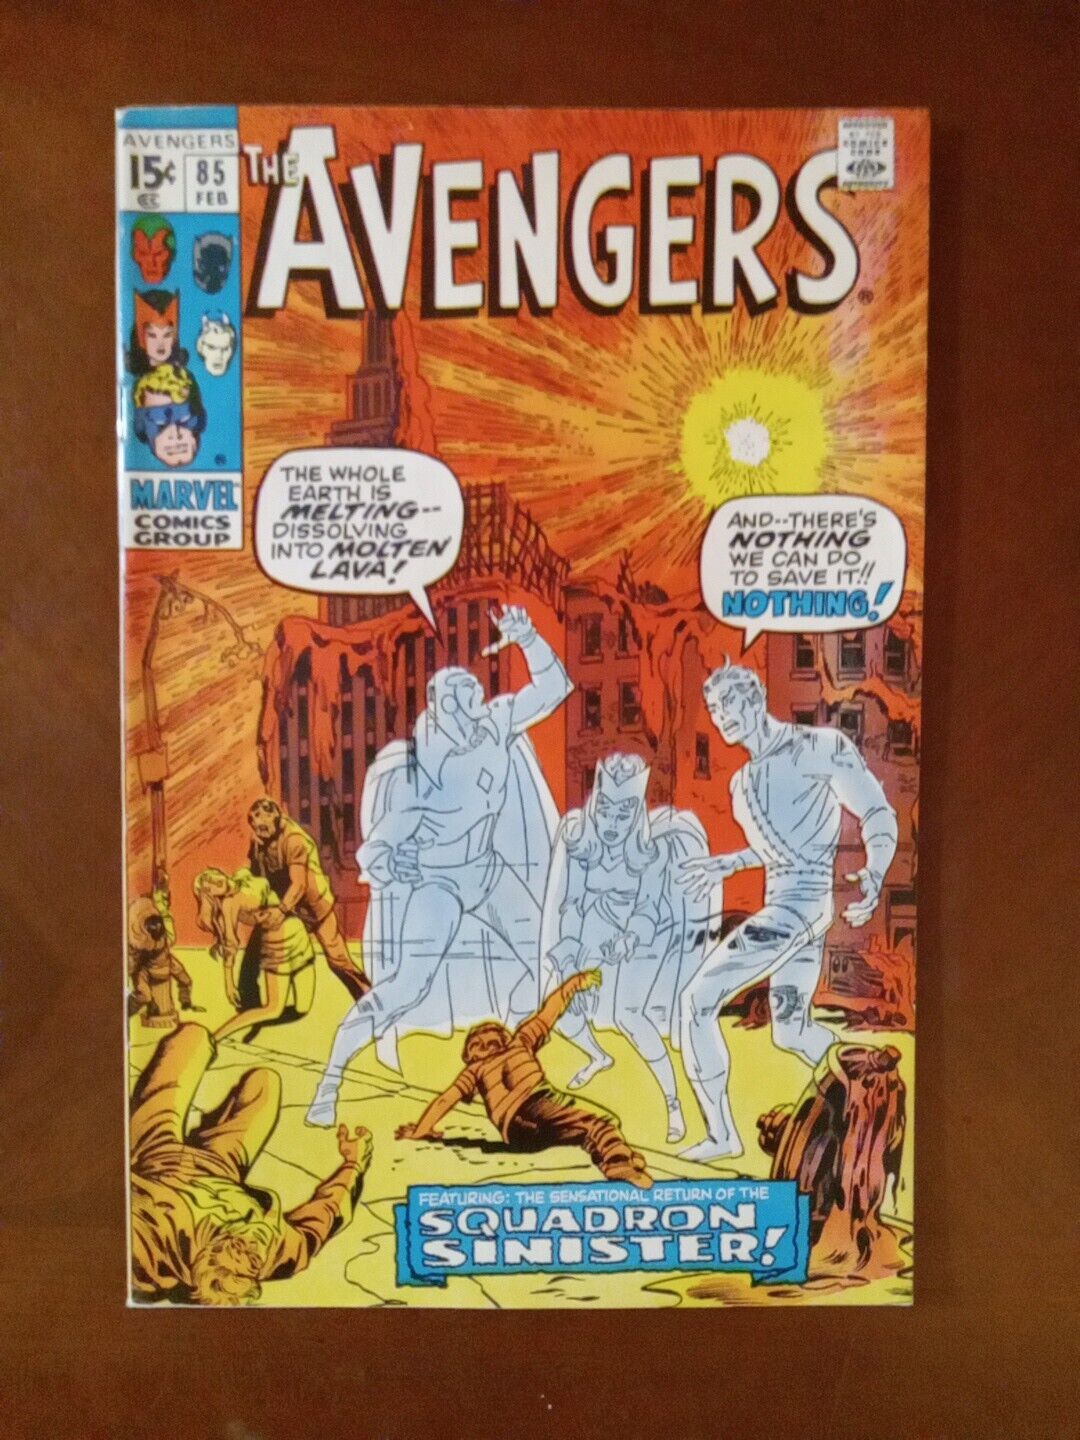 Avengers #85,  1971, 1st Appearance of SquadronSinister Very Nice Book 9.0